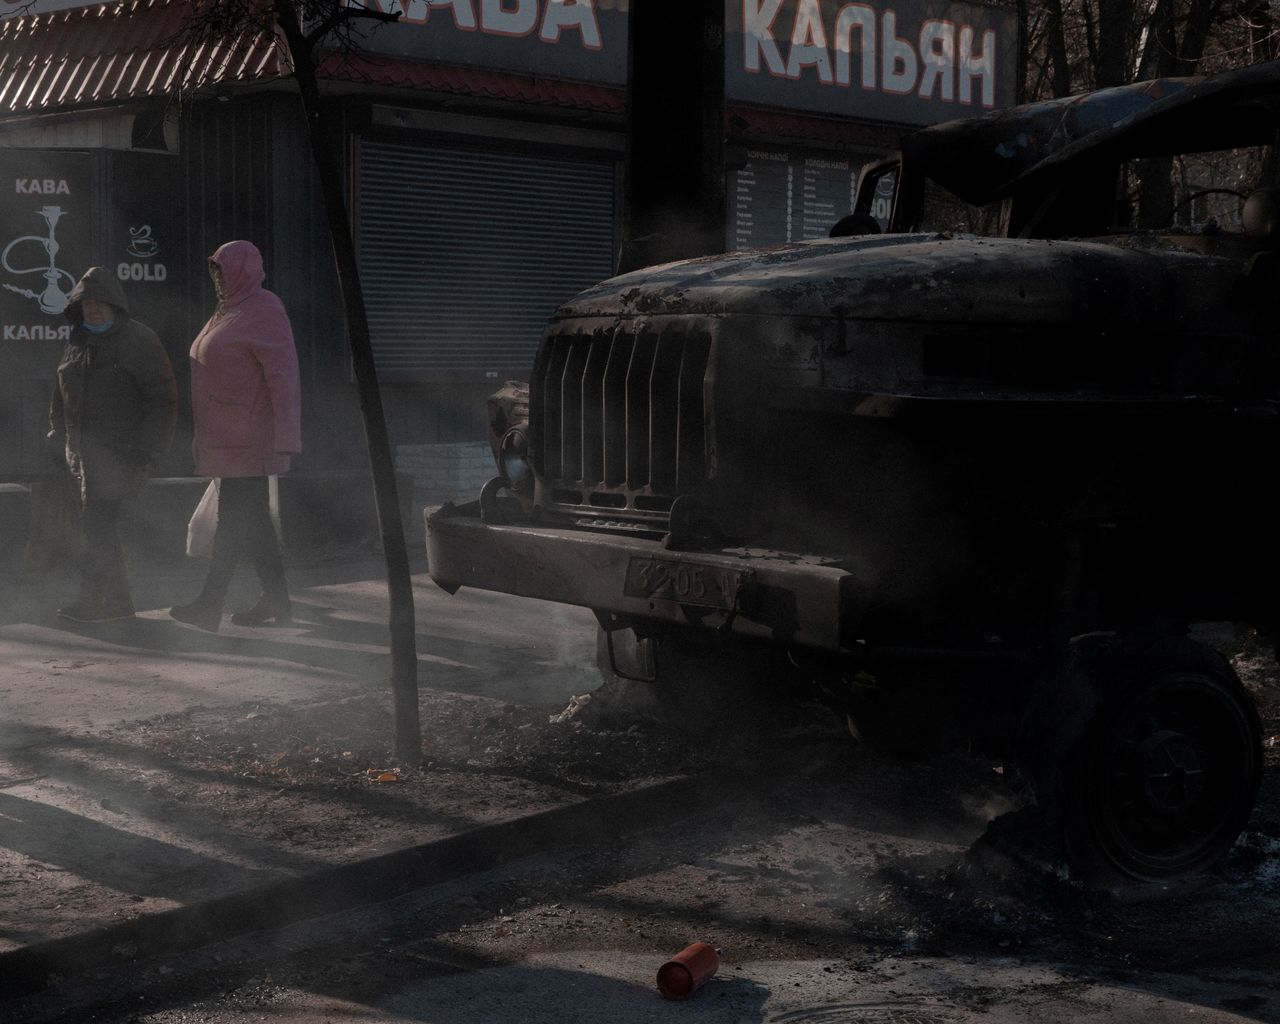 People walk past a burnt vehicle, as Russia